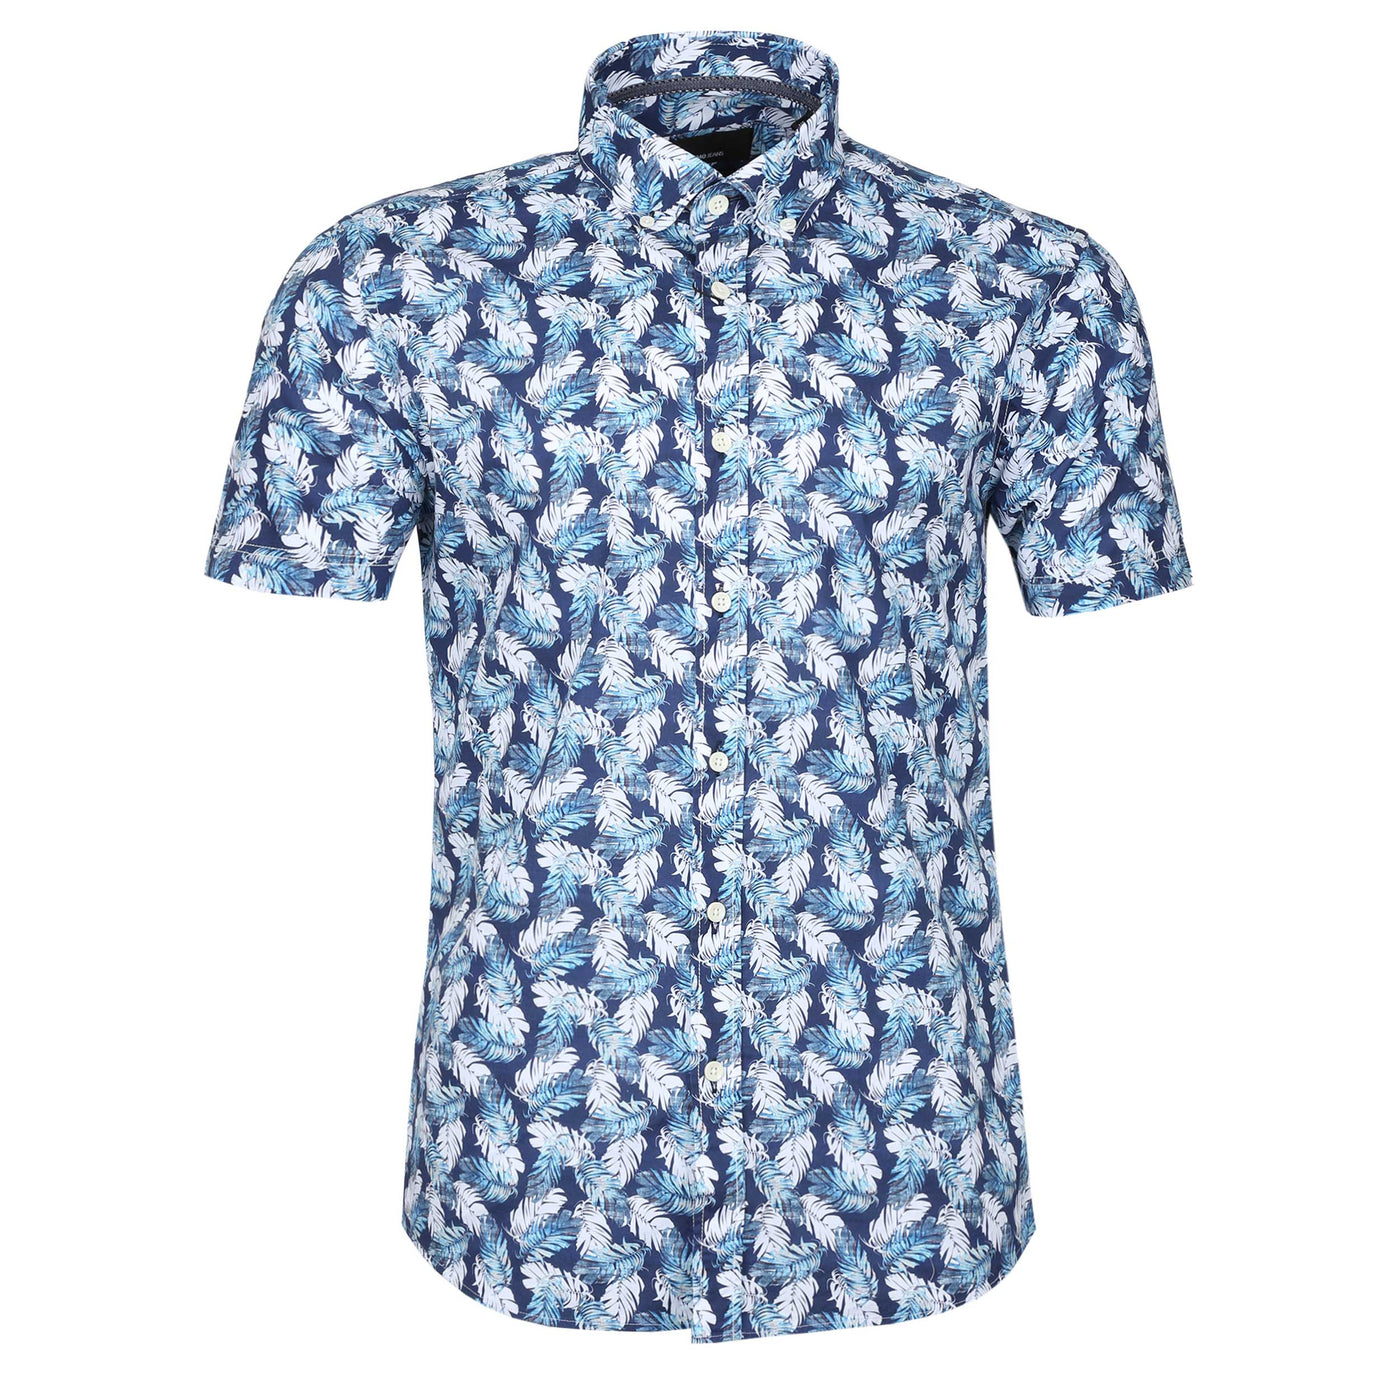 Remus Uomo Mid Leaf Floral Print SS Shirt in Navy